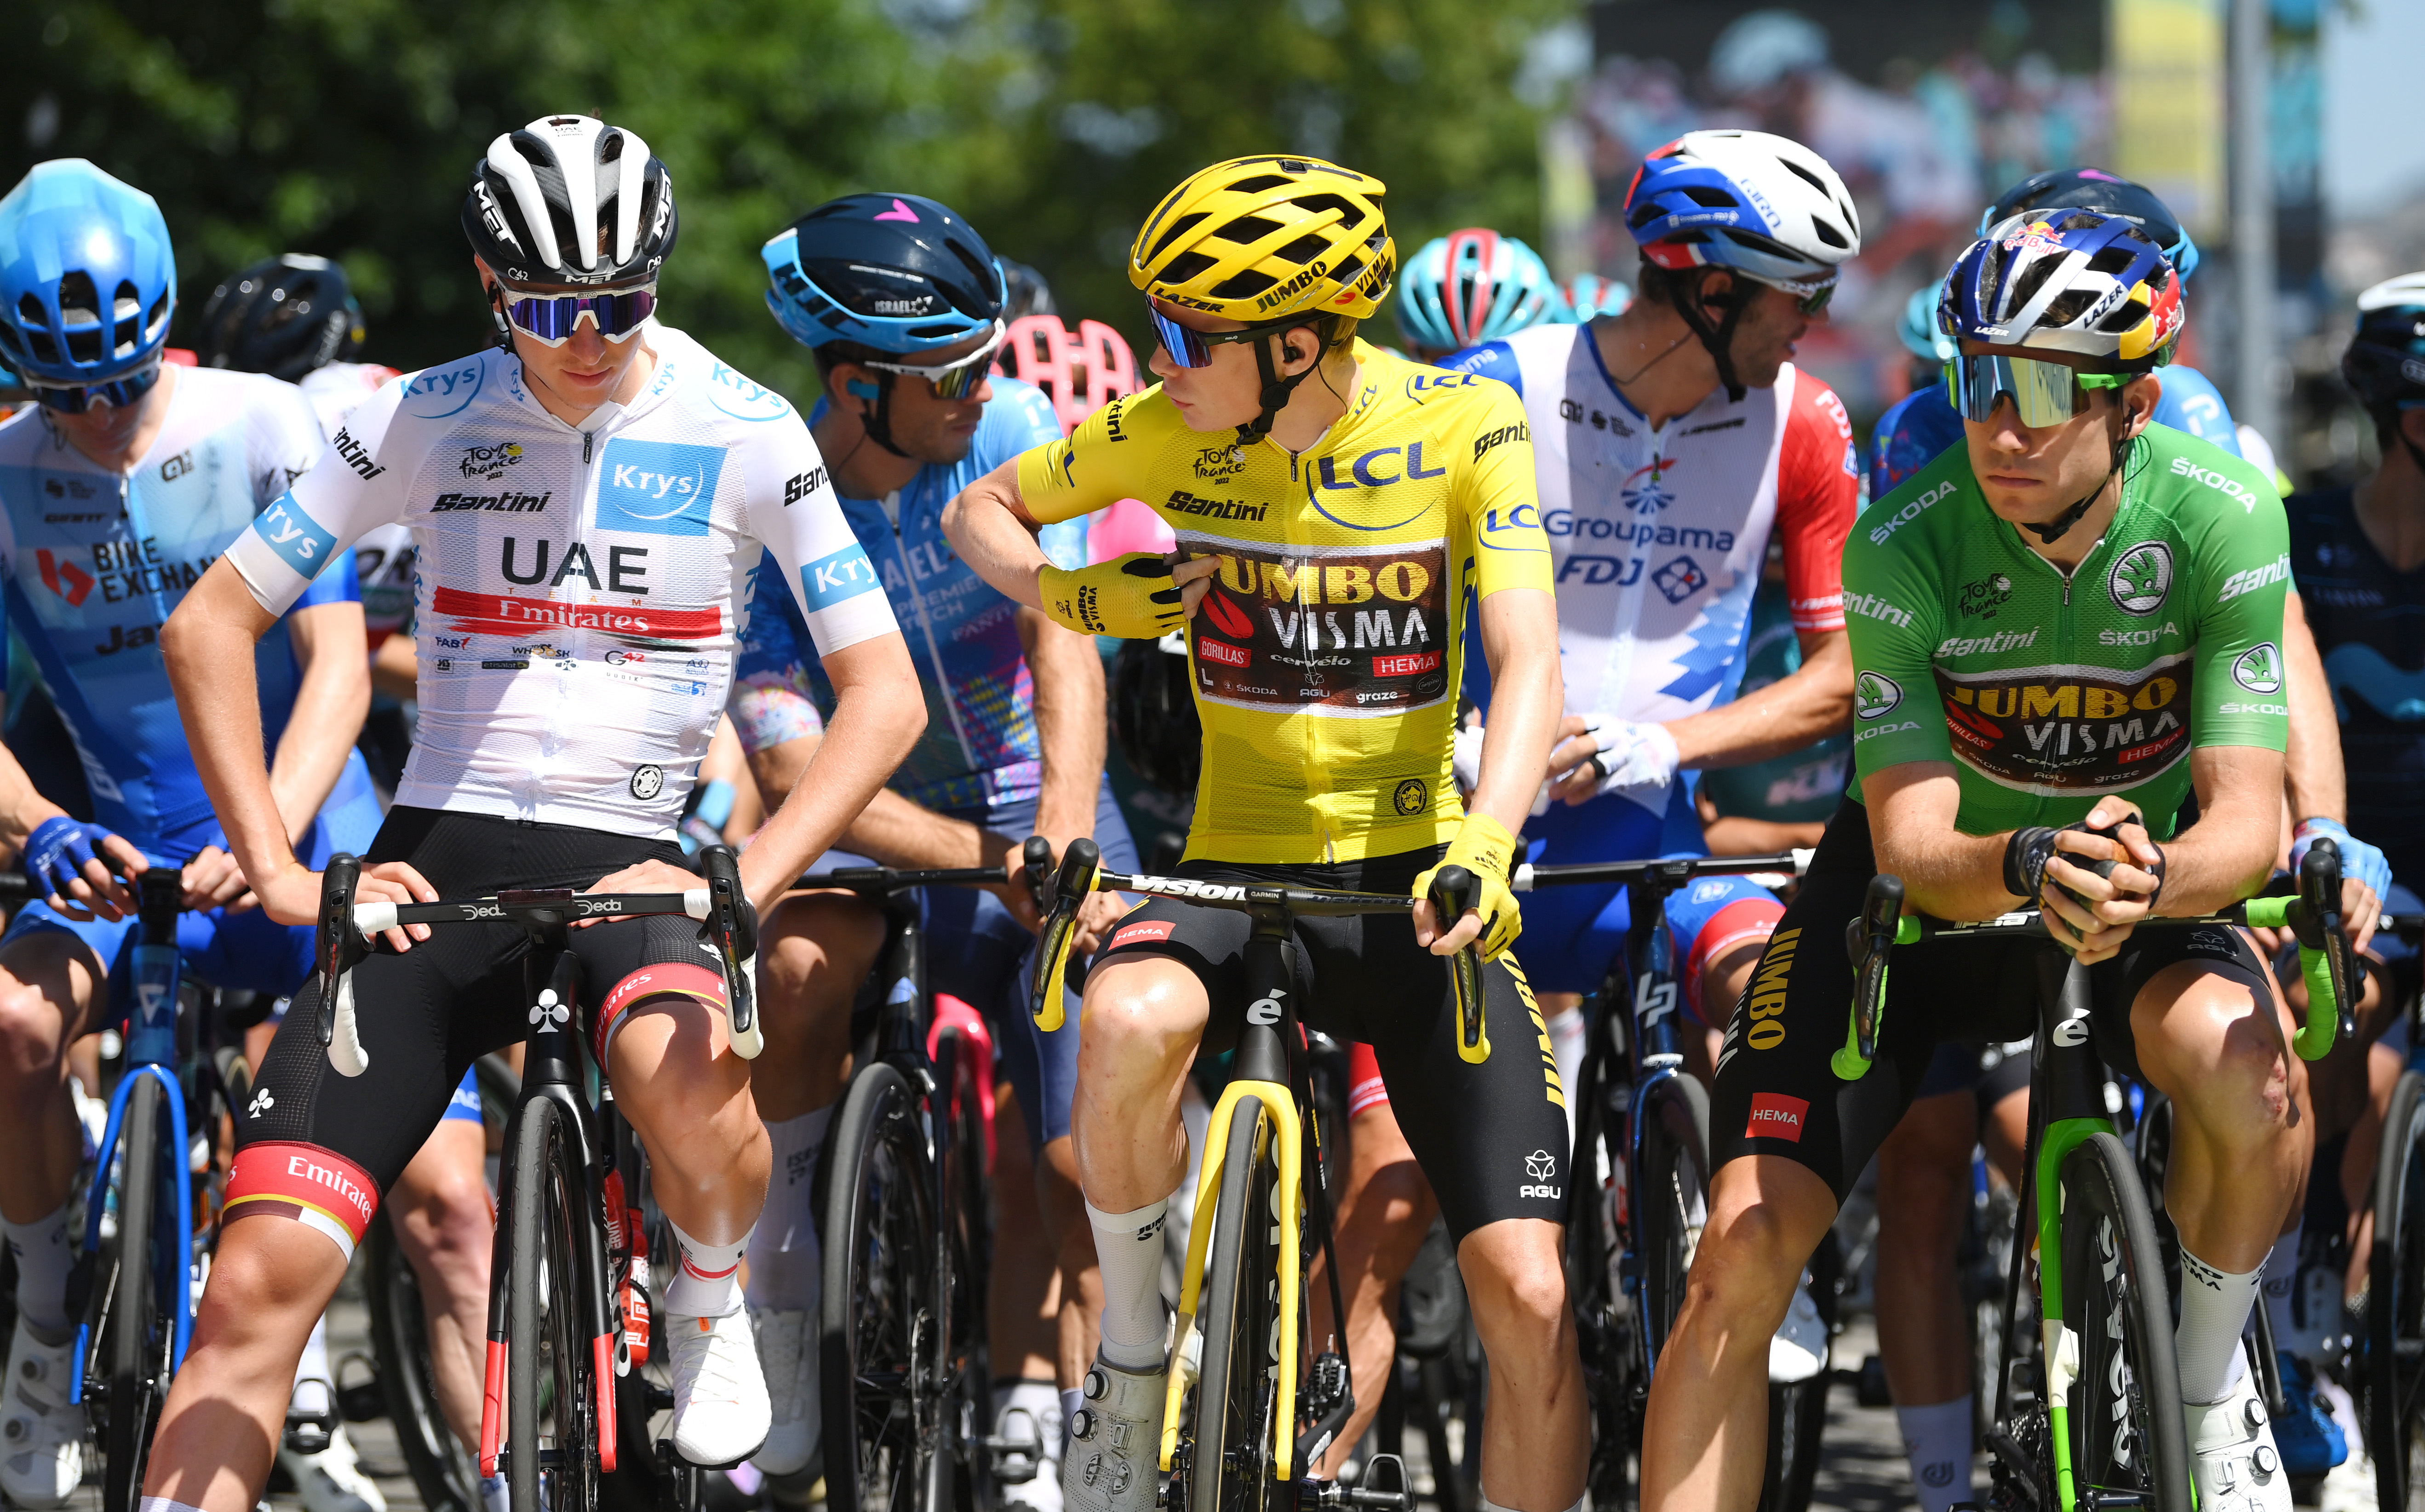 Tadej Pogacar of Slovenia and UAE Team Emirates white best young jersey, Jonas Vingegaard Rasmussen of Denmark Yellow Leader Jersey and Wout Van Aert of Belgium and Team Jumbo - Visma Green Points Jersey prior to the 109th Tour de France 2022, Stage 14 a 192,5km stage from Saint-Etienne to Mende 1009m / #TDF2022 / #WorldTour / on July 16, 2022 in Mende, France.